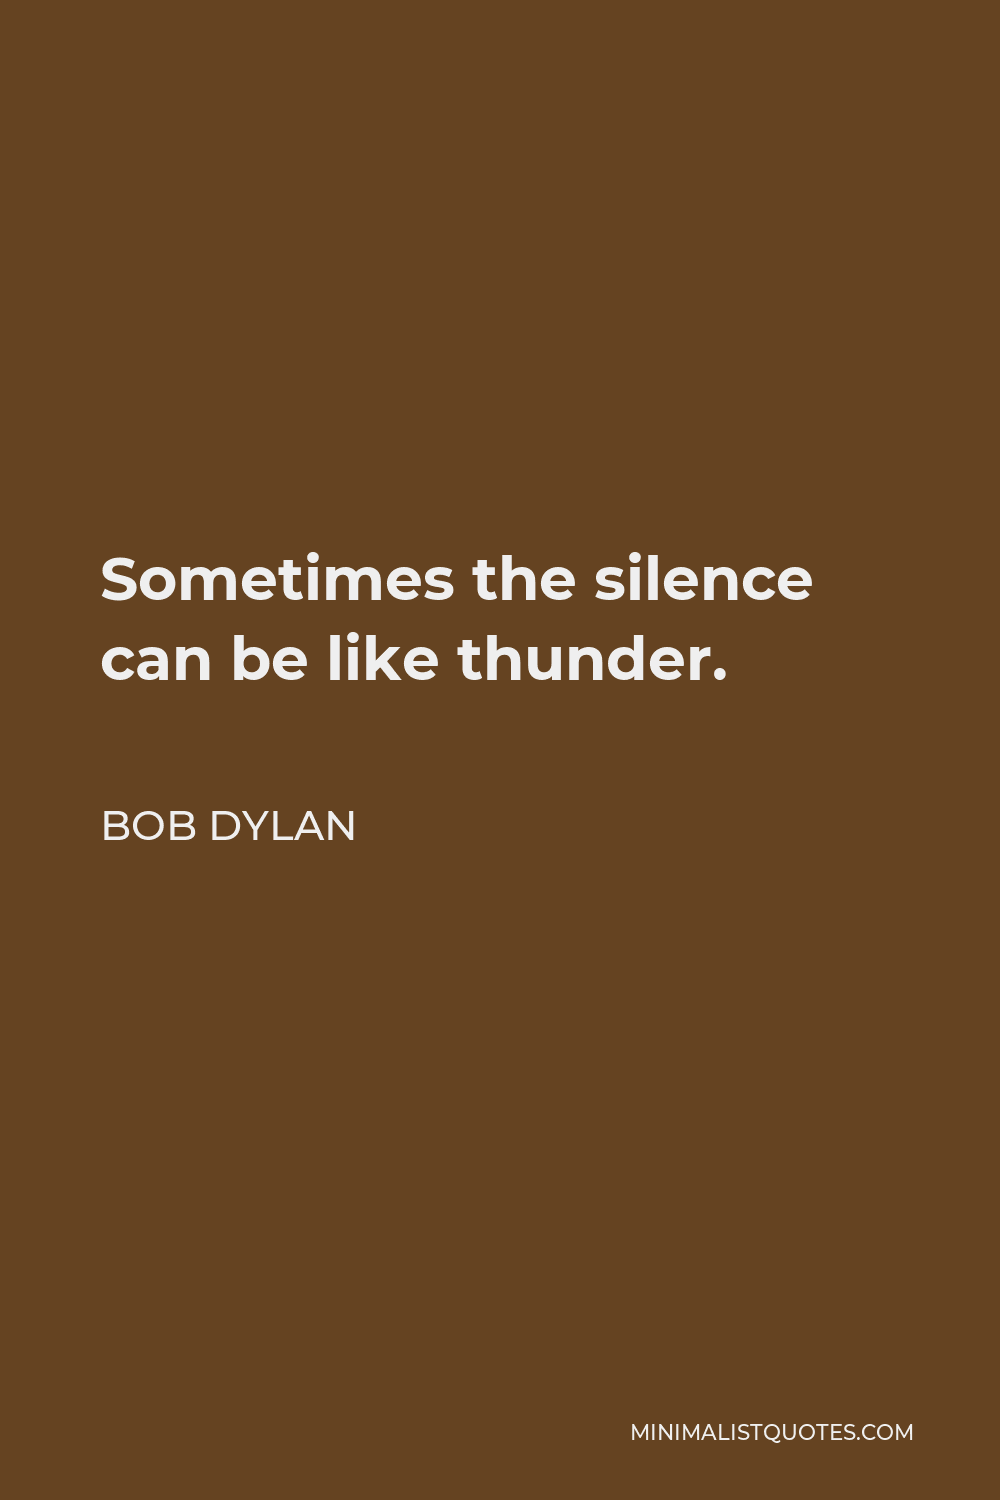 Bob Dylan Quote - Sometimes the silence can be like thunder.